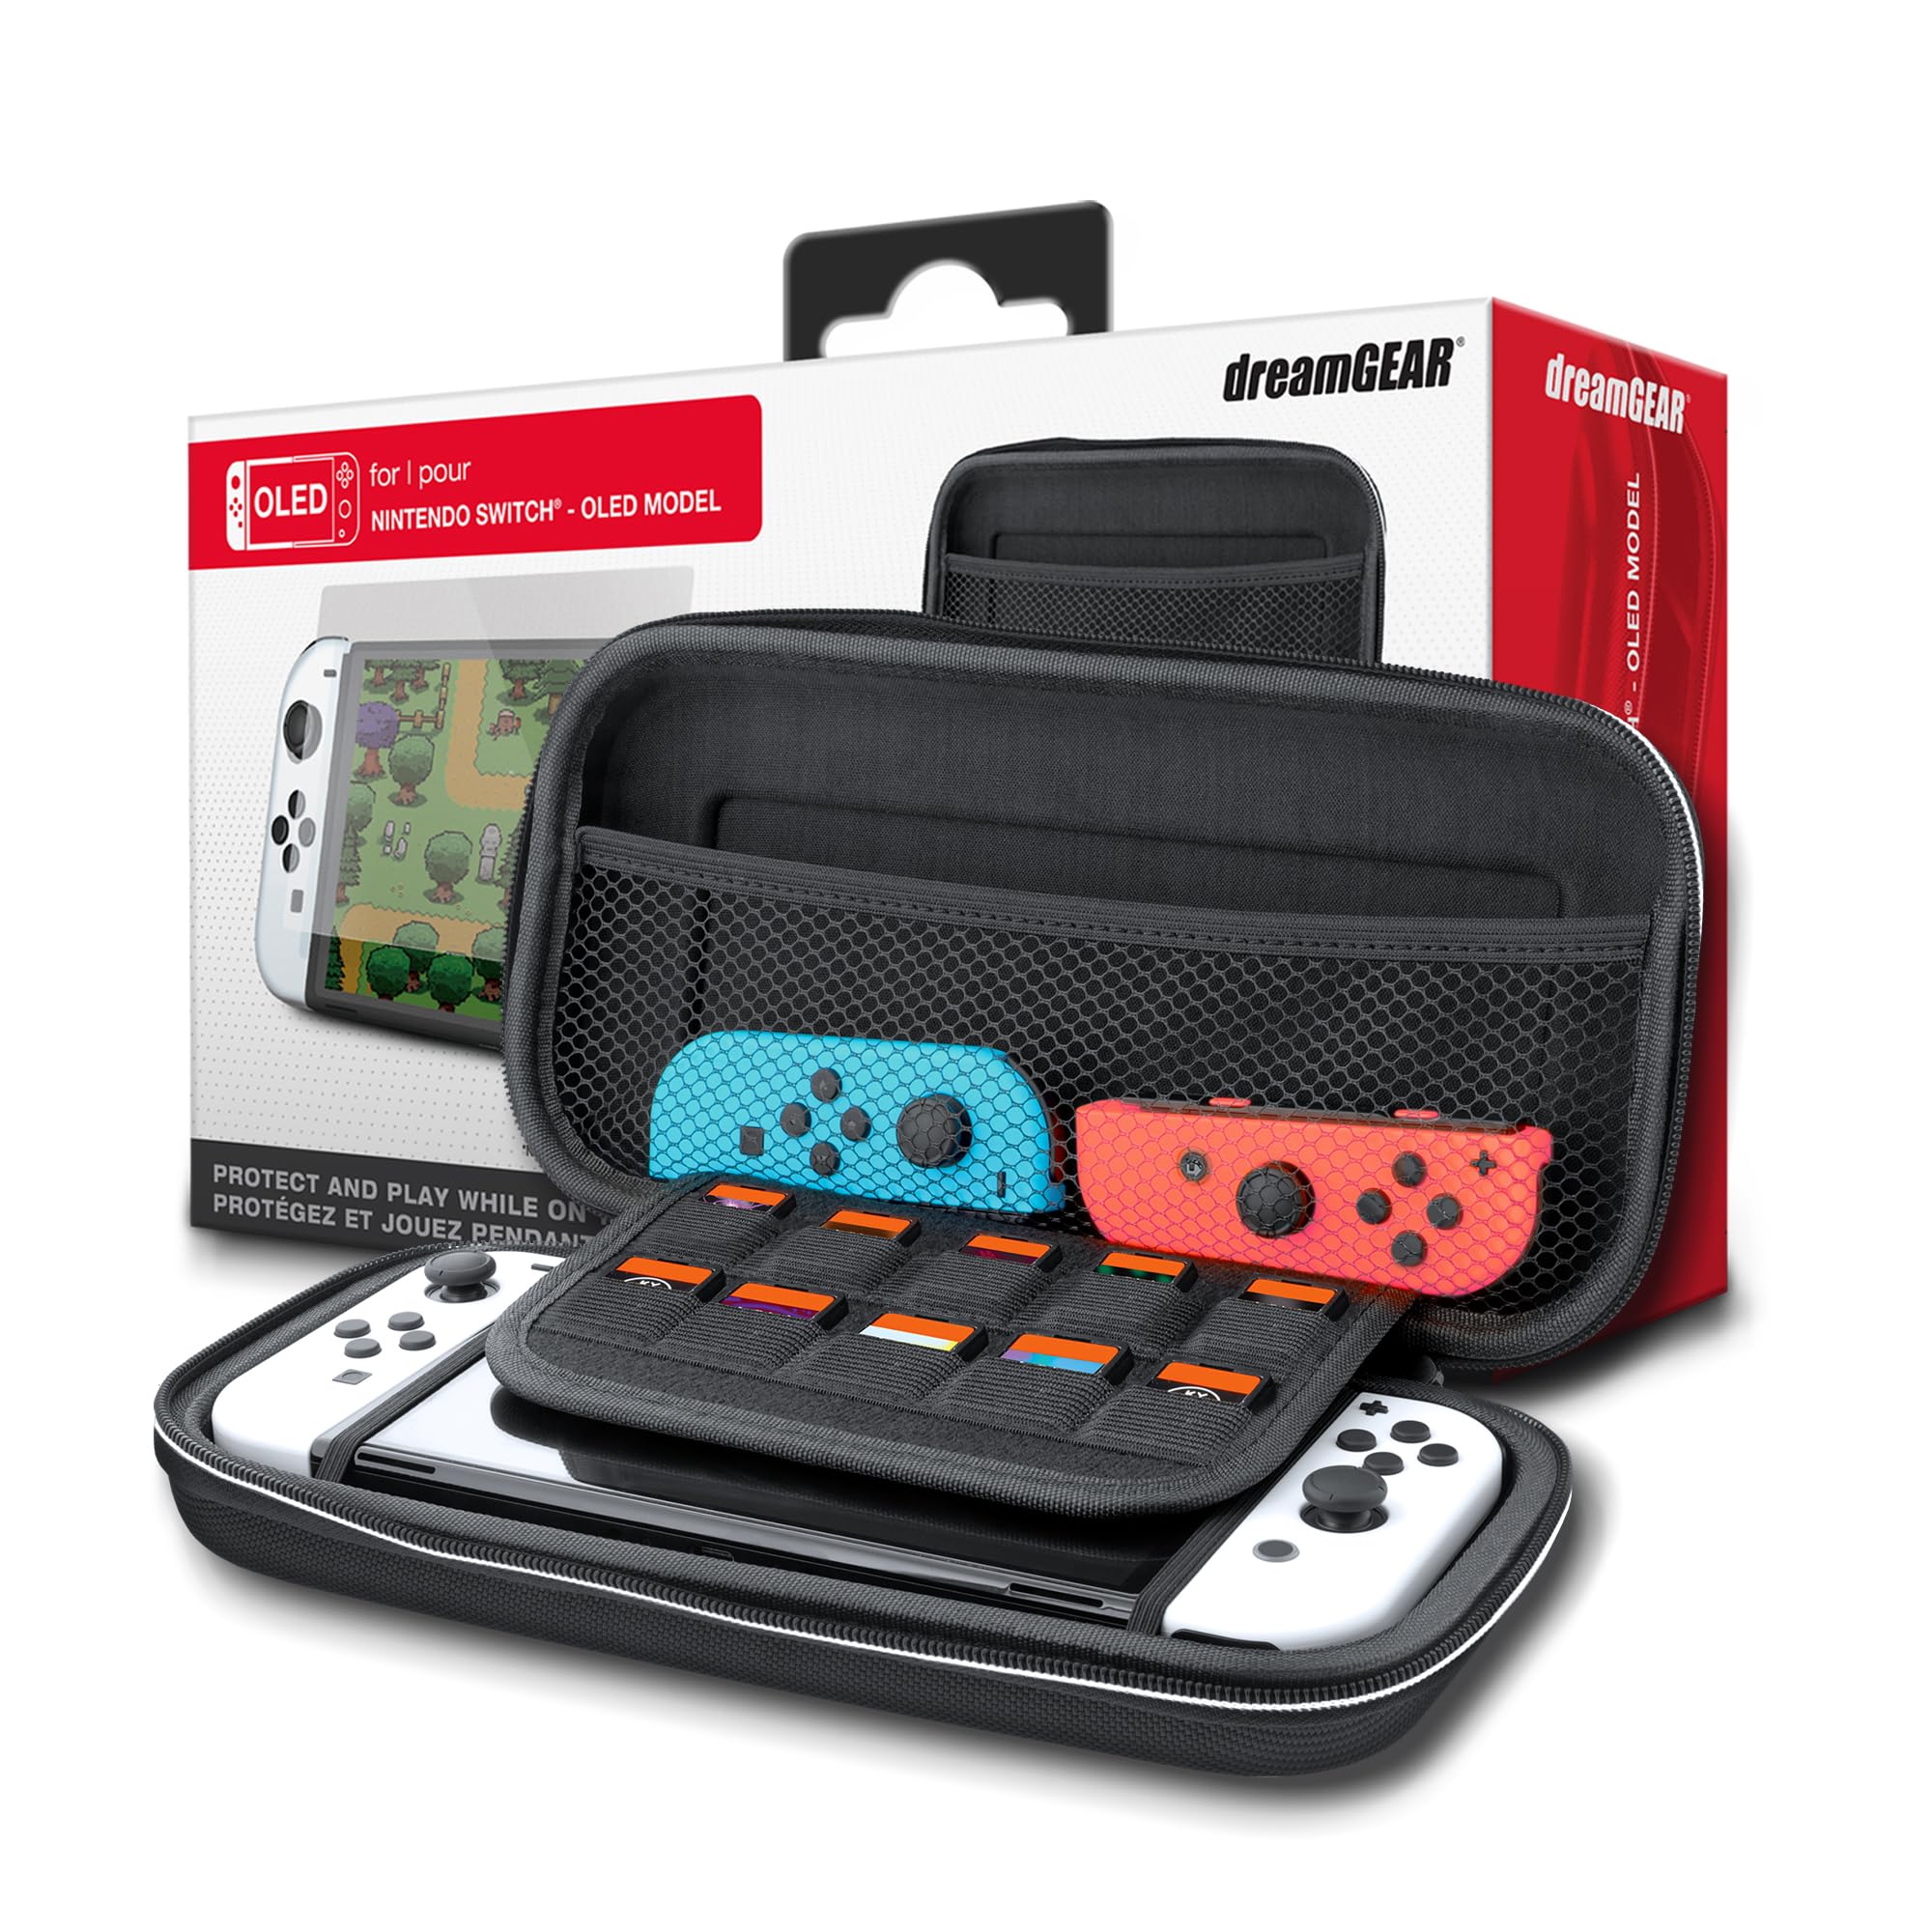 dreamGEAR Guardian Pack for Nintendo Switch OLED: Protective Hard Portable Travel Carry Case, Screen Protector, Compatible with Nintnedo Switch and Switch OLED